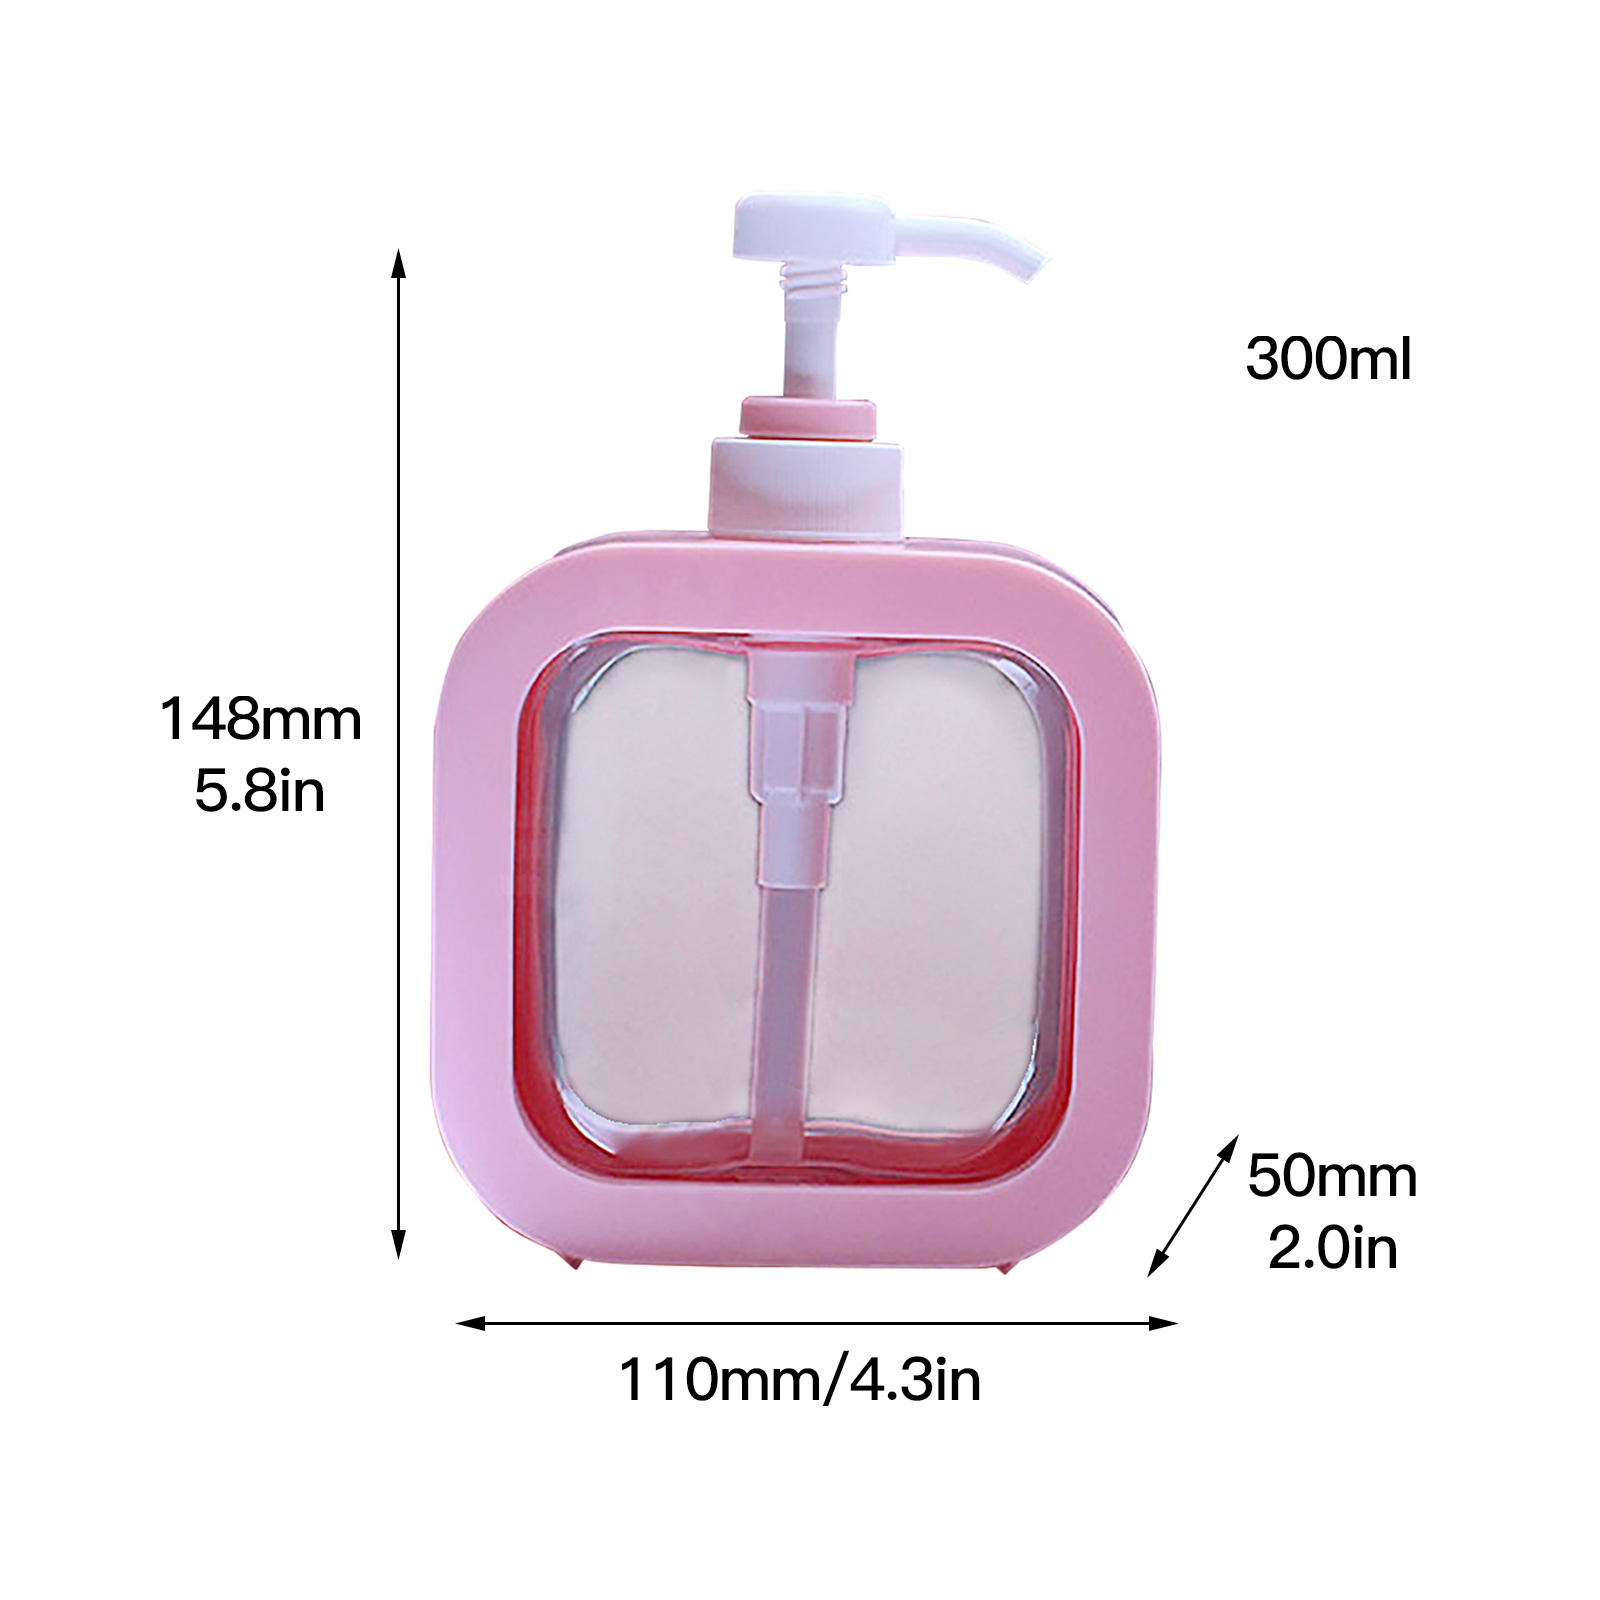 Yuedong Pump Bottle Dispenser Plastic Pump Bottles Refillable Bottles Wide Mouth Jar Style ,Empty Pump Bottles Kitchen Bathroom Shower Containers for Lotion Shampoo Conditioner -2 Pack ,300ML - image 2 of 12